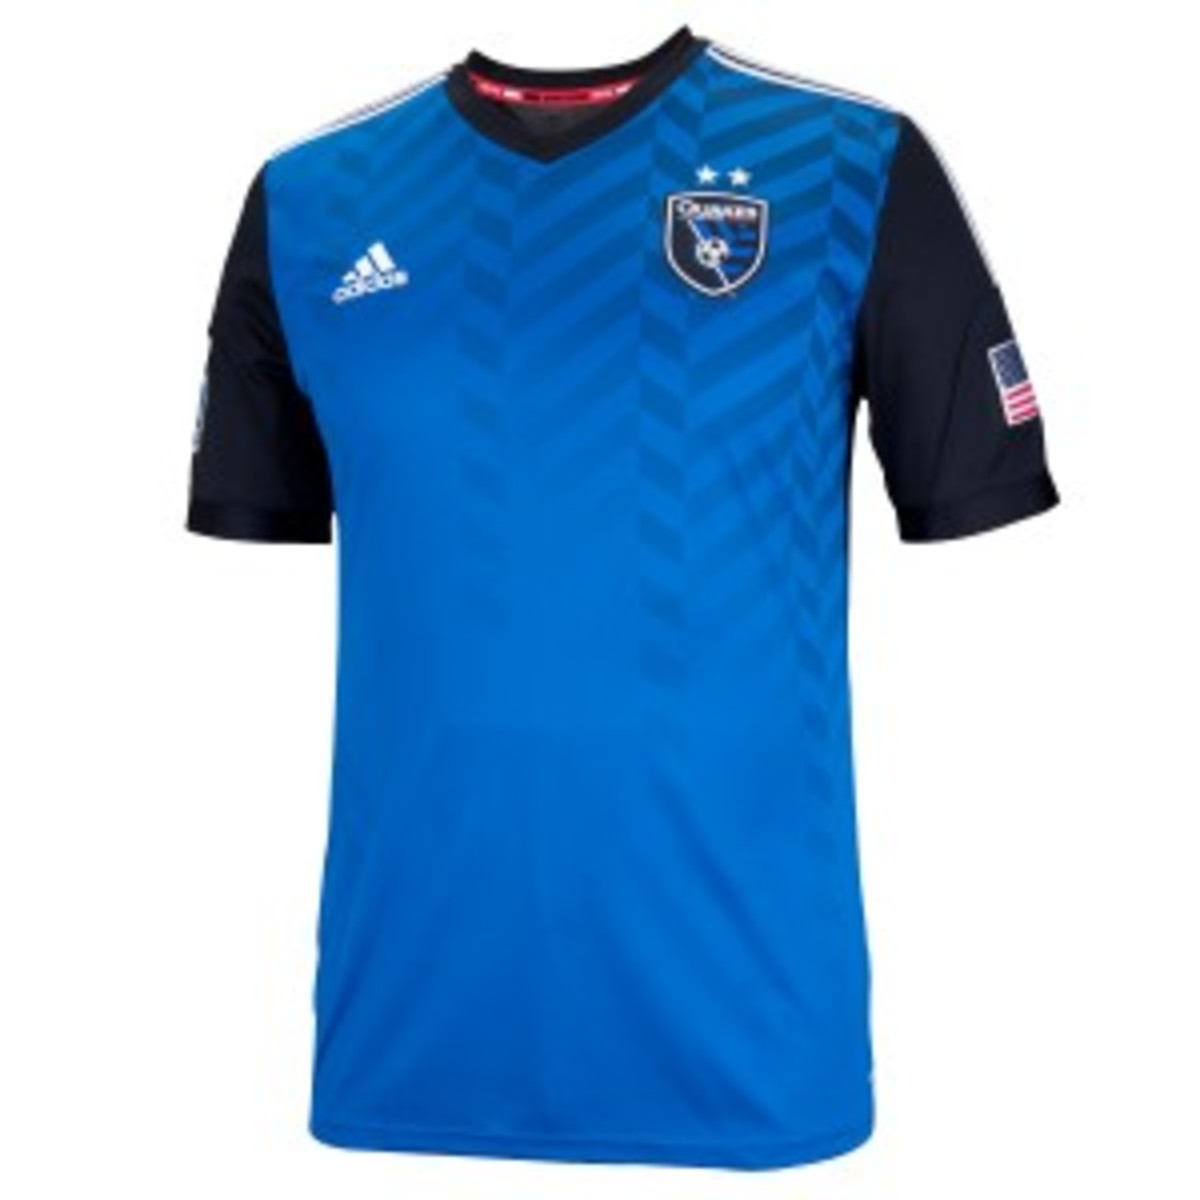 Earthquakes primary jersey